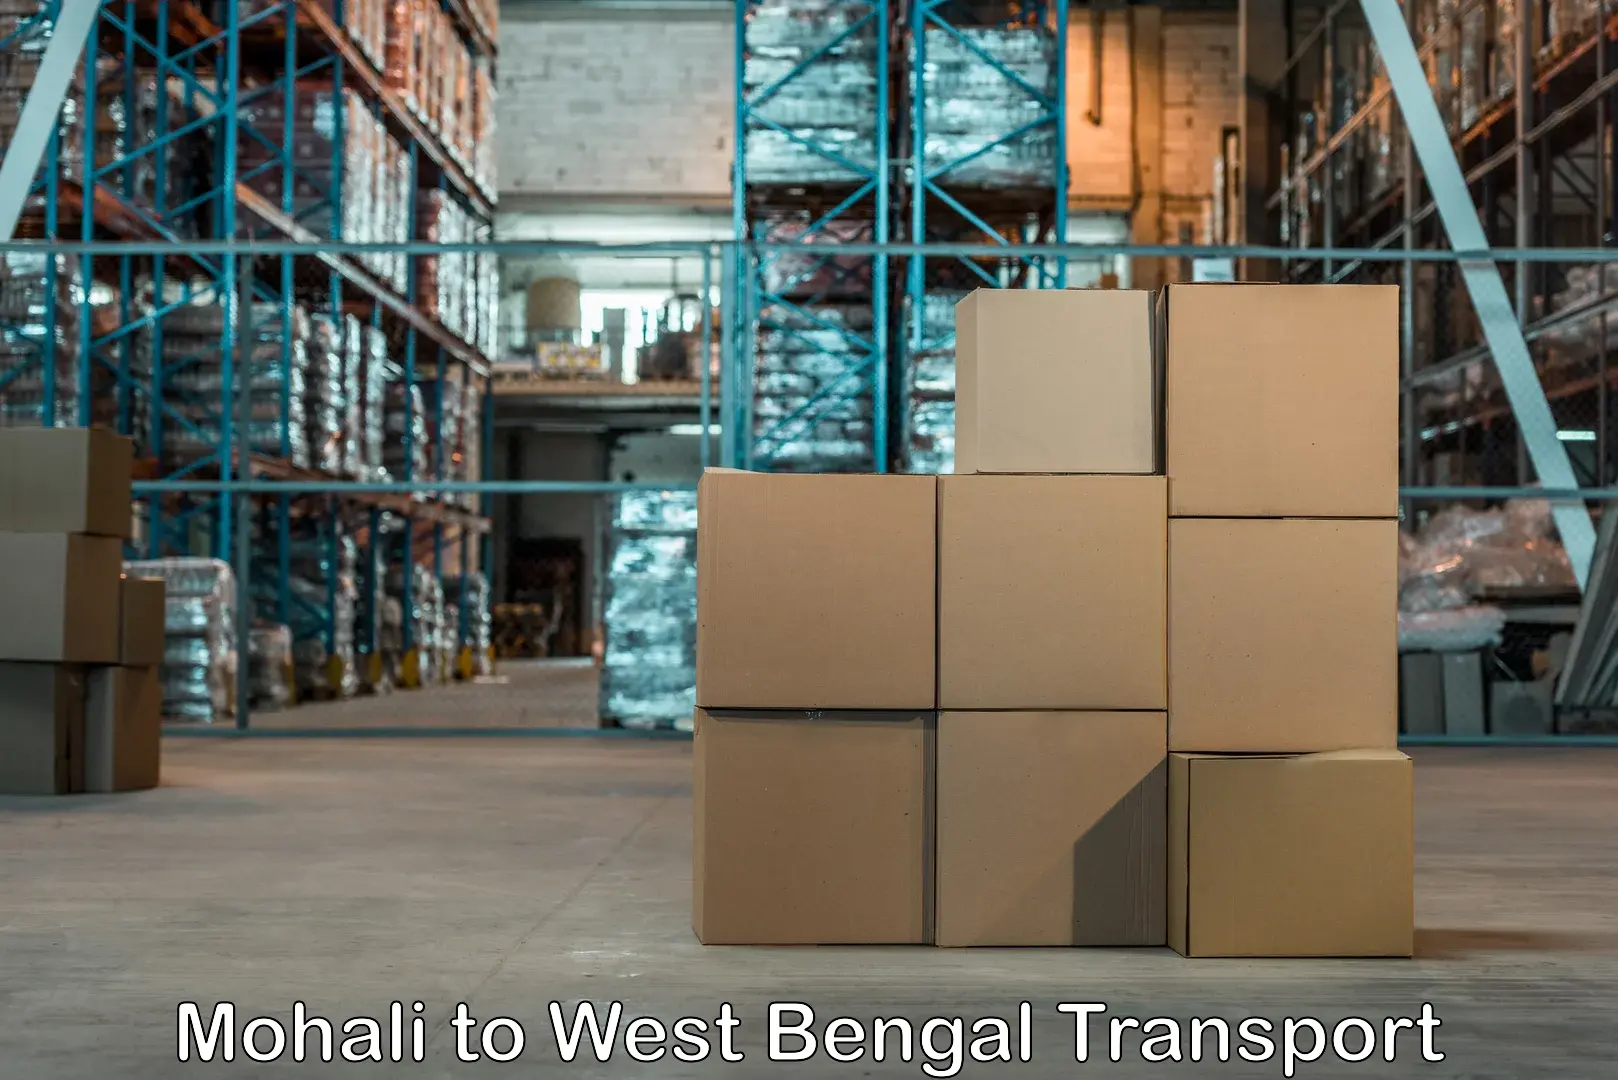 Truck transport companies in India Mohali to Chhatna